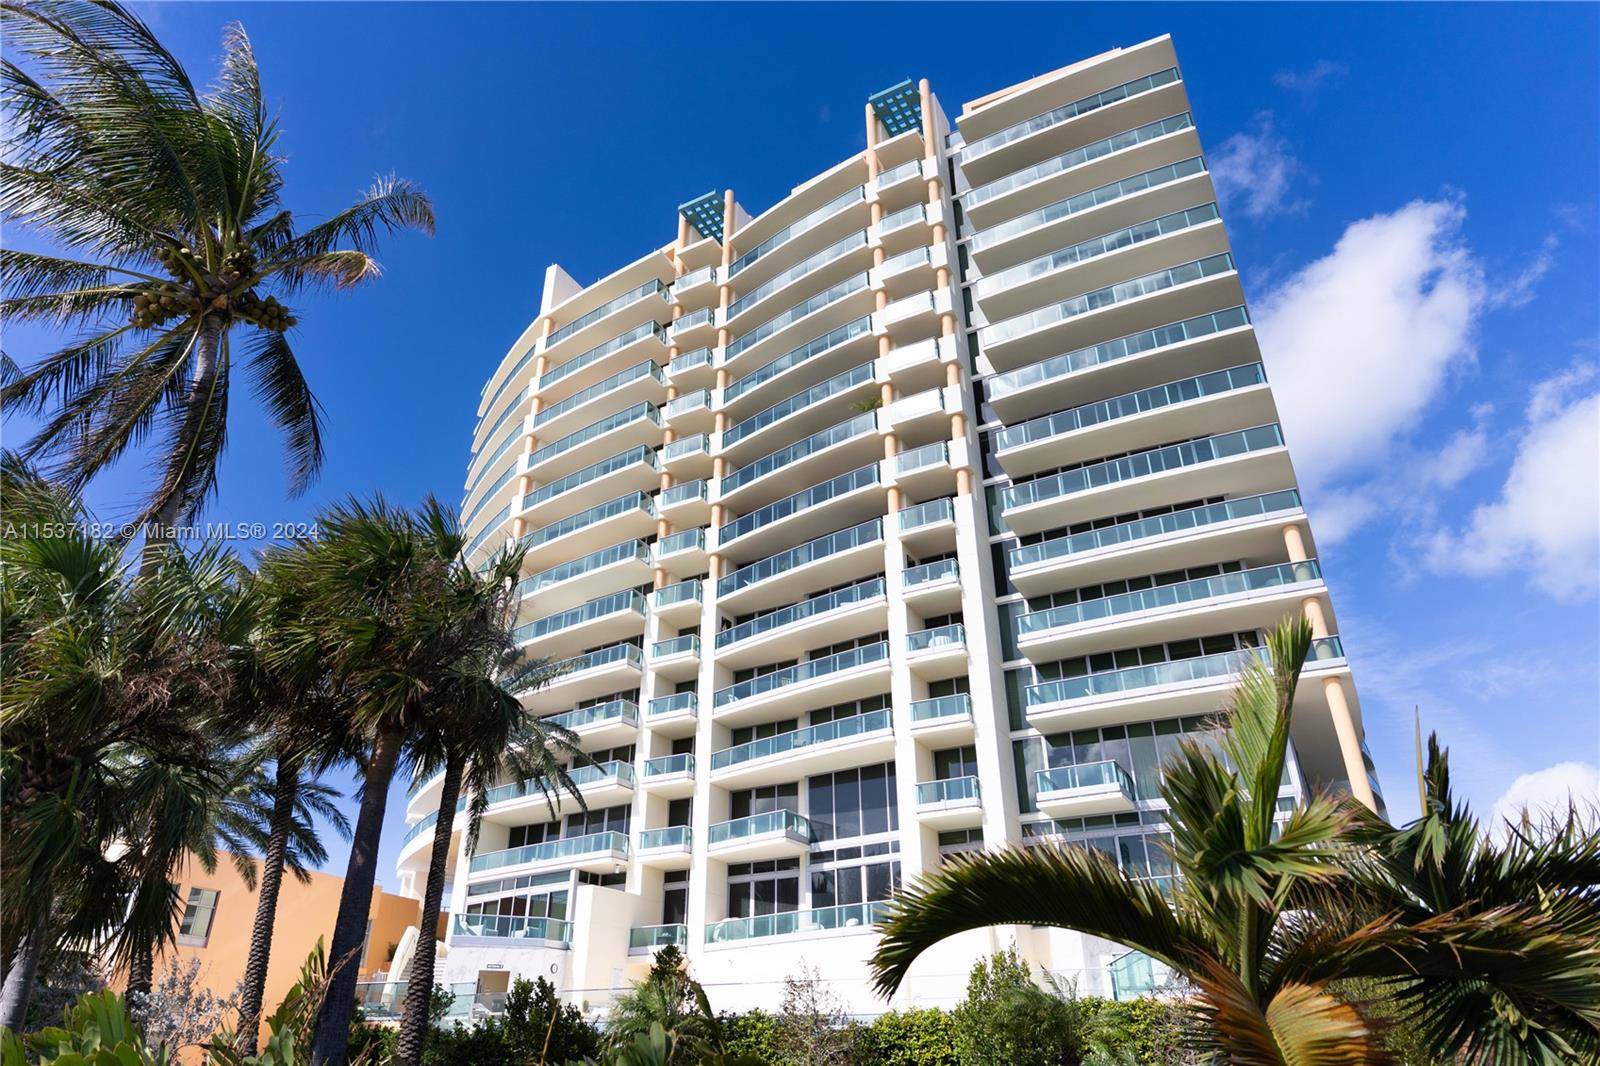 l Villaggio is a 17 story oceanfront condo tower ideally located in the heart of South Beach just steps from an array of restaurants, shopping and entertainment.